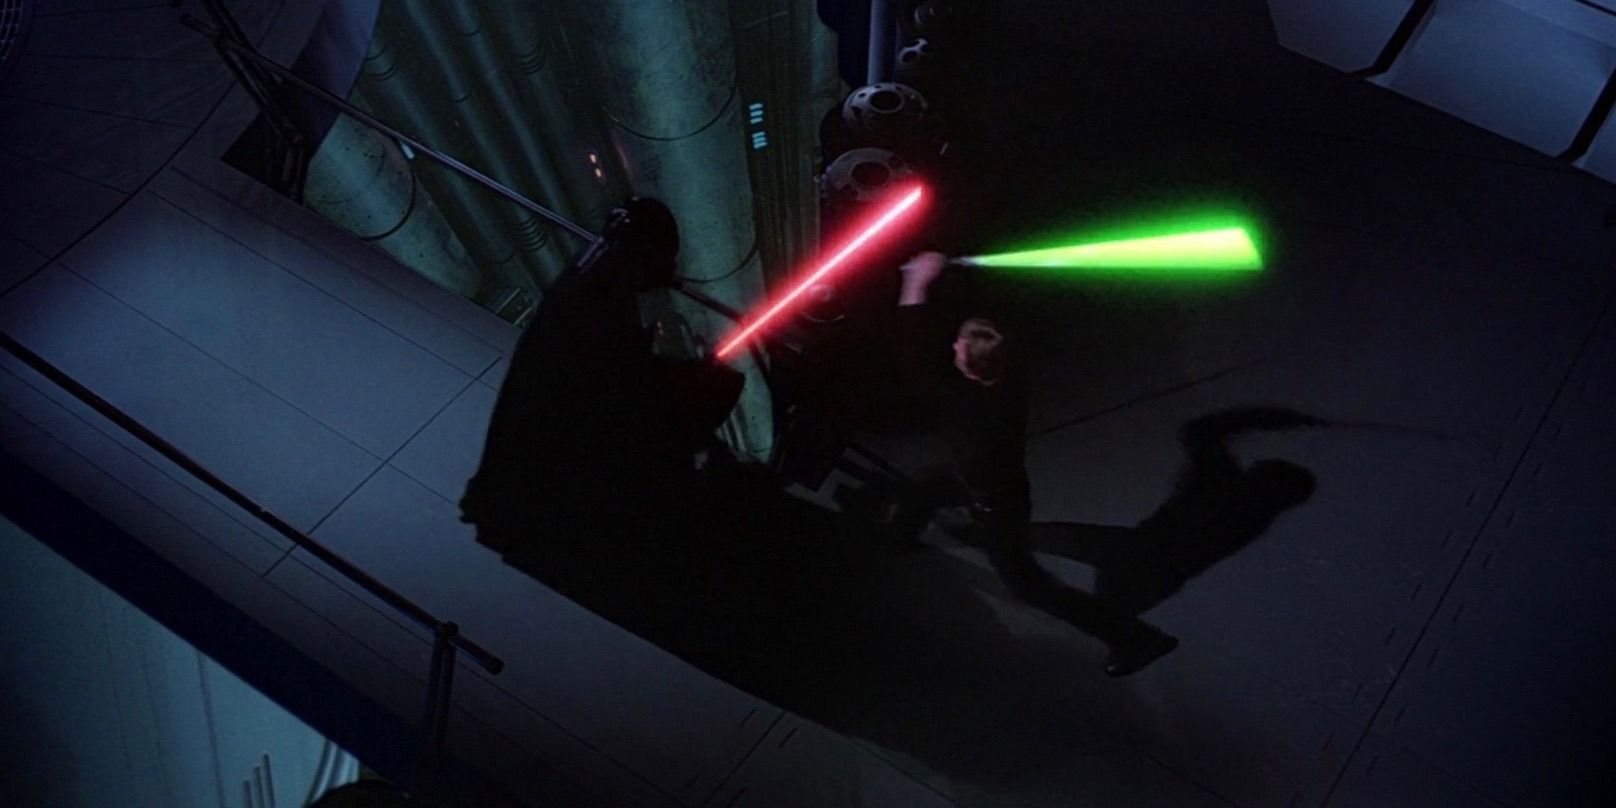 Star Wars Darth Vaders Best Quotes In The Original Trilogy (& Anakins Best In The Prequels)